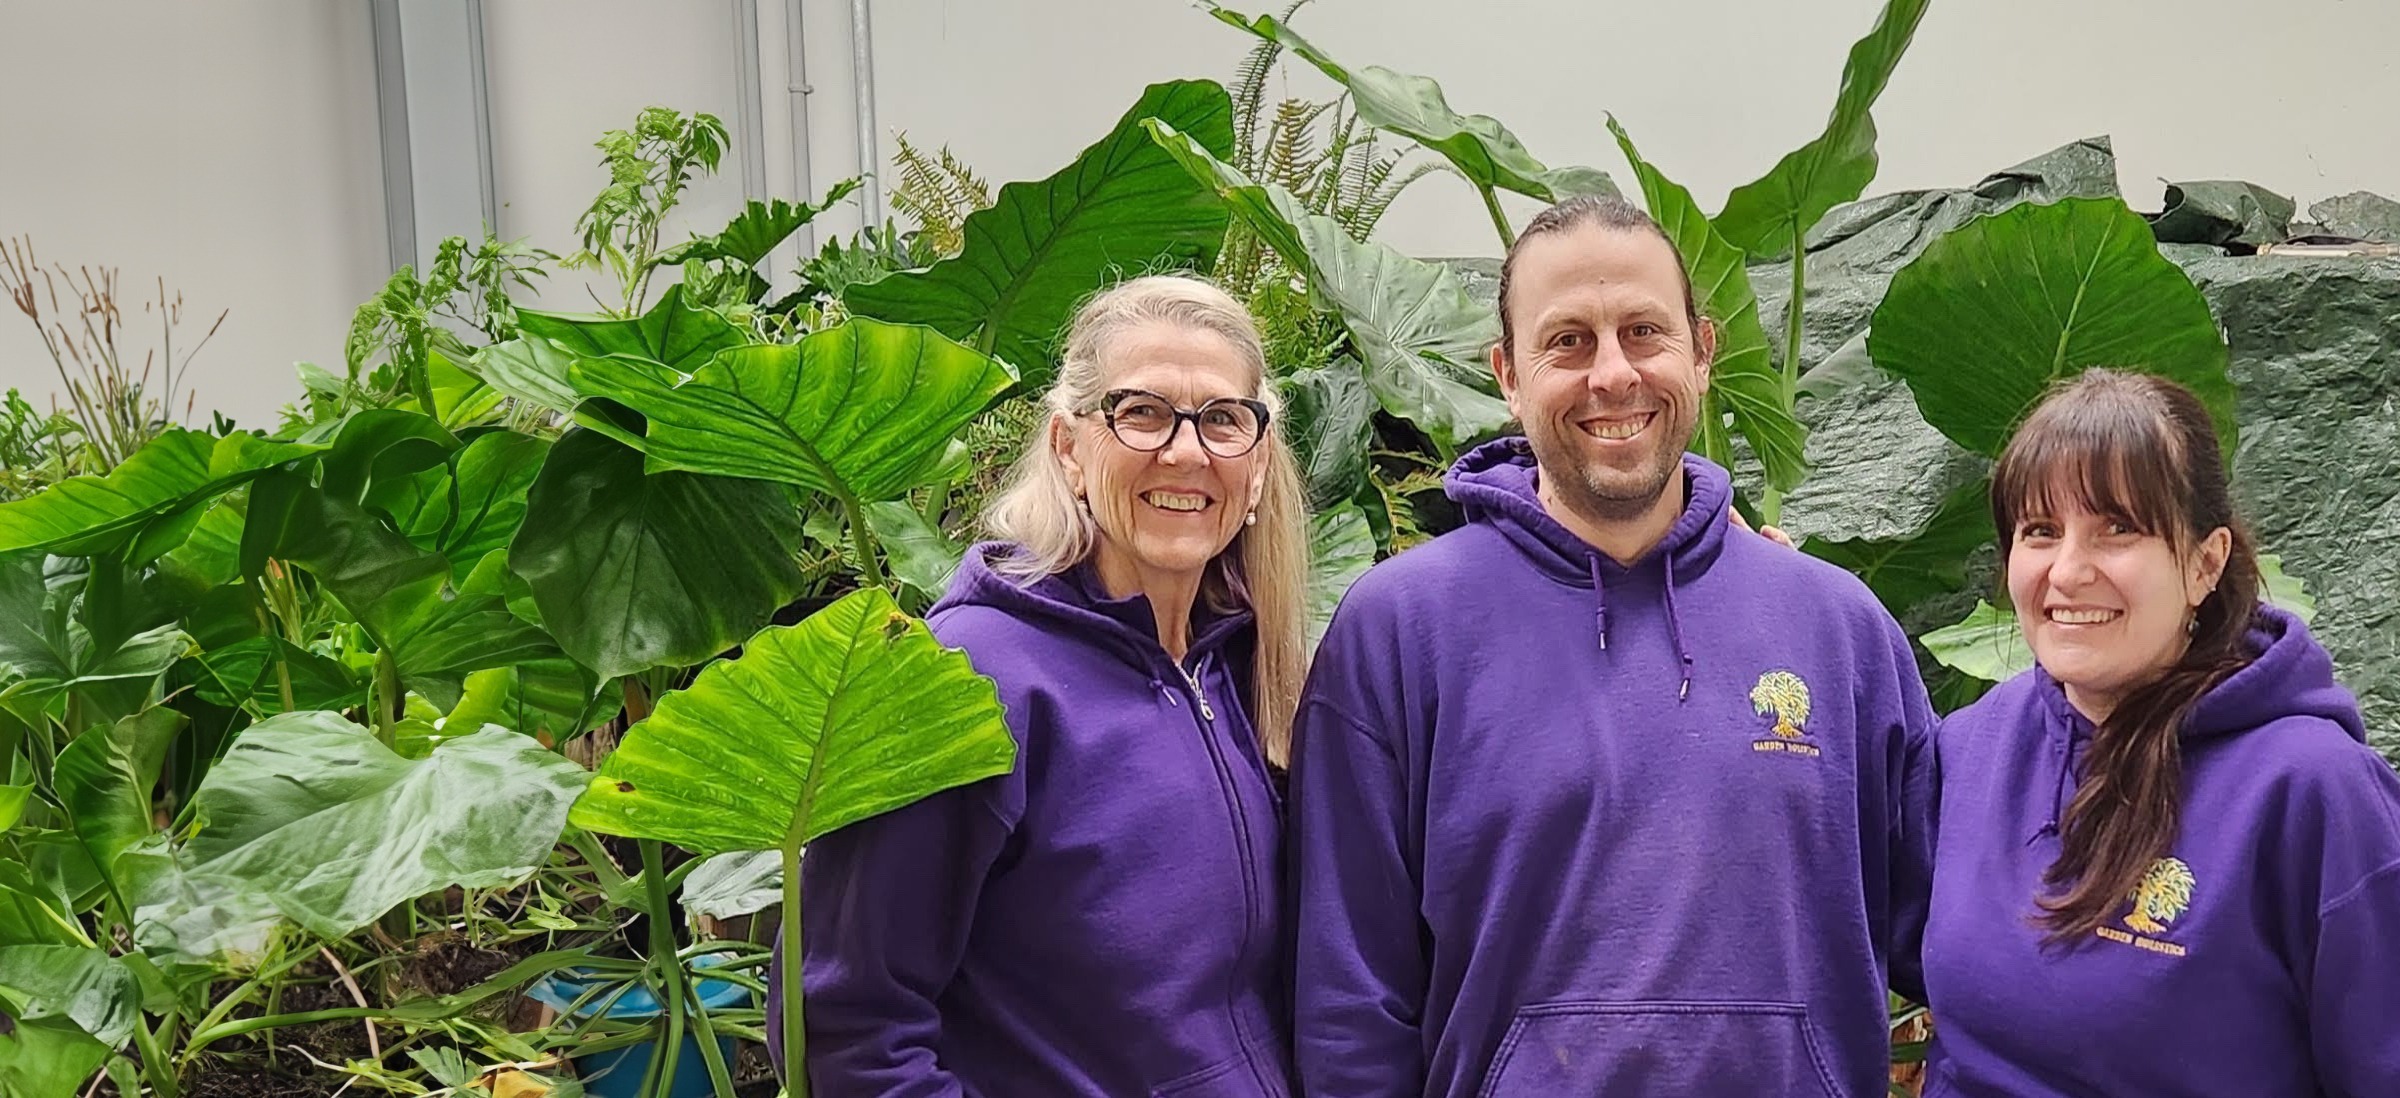 Three people stand in front of large green leaves, smiling and wearing matching purple hoodies with a logo, in a bright, plant-filled indoor setting.